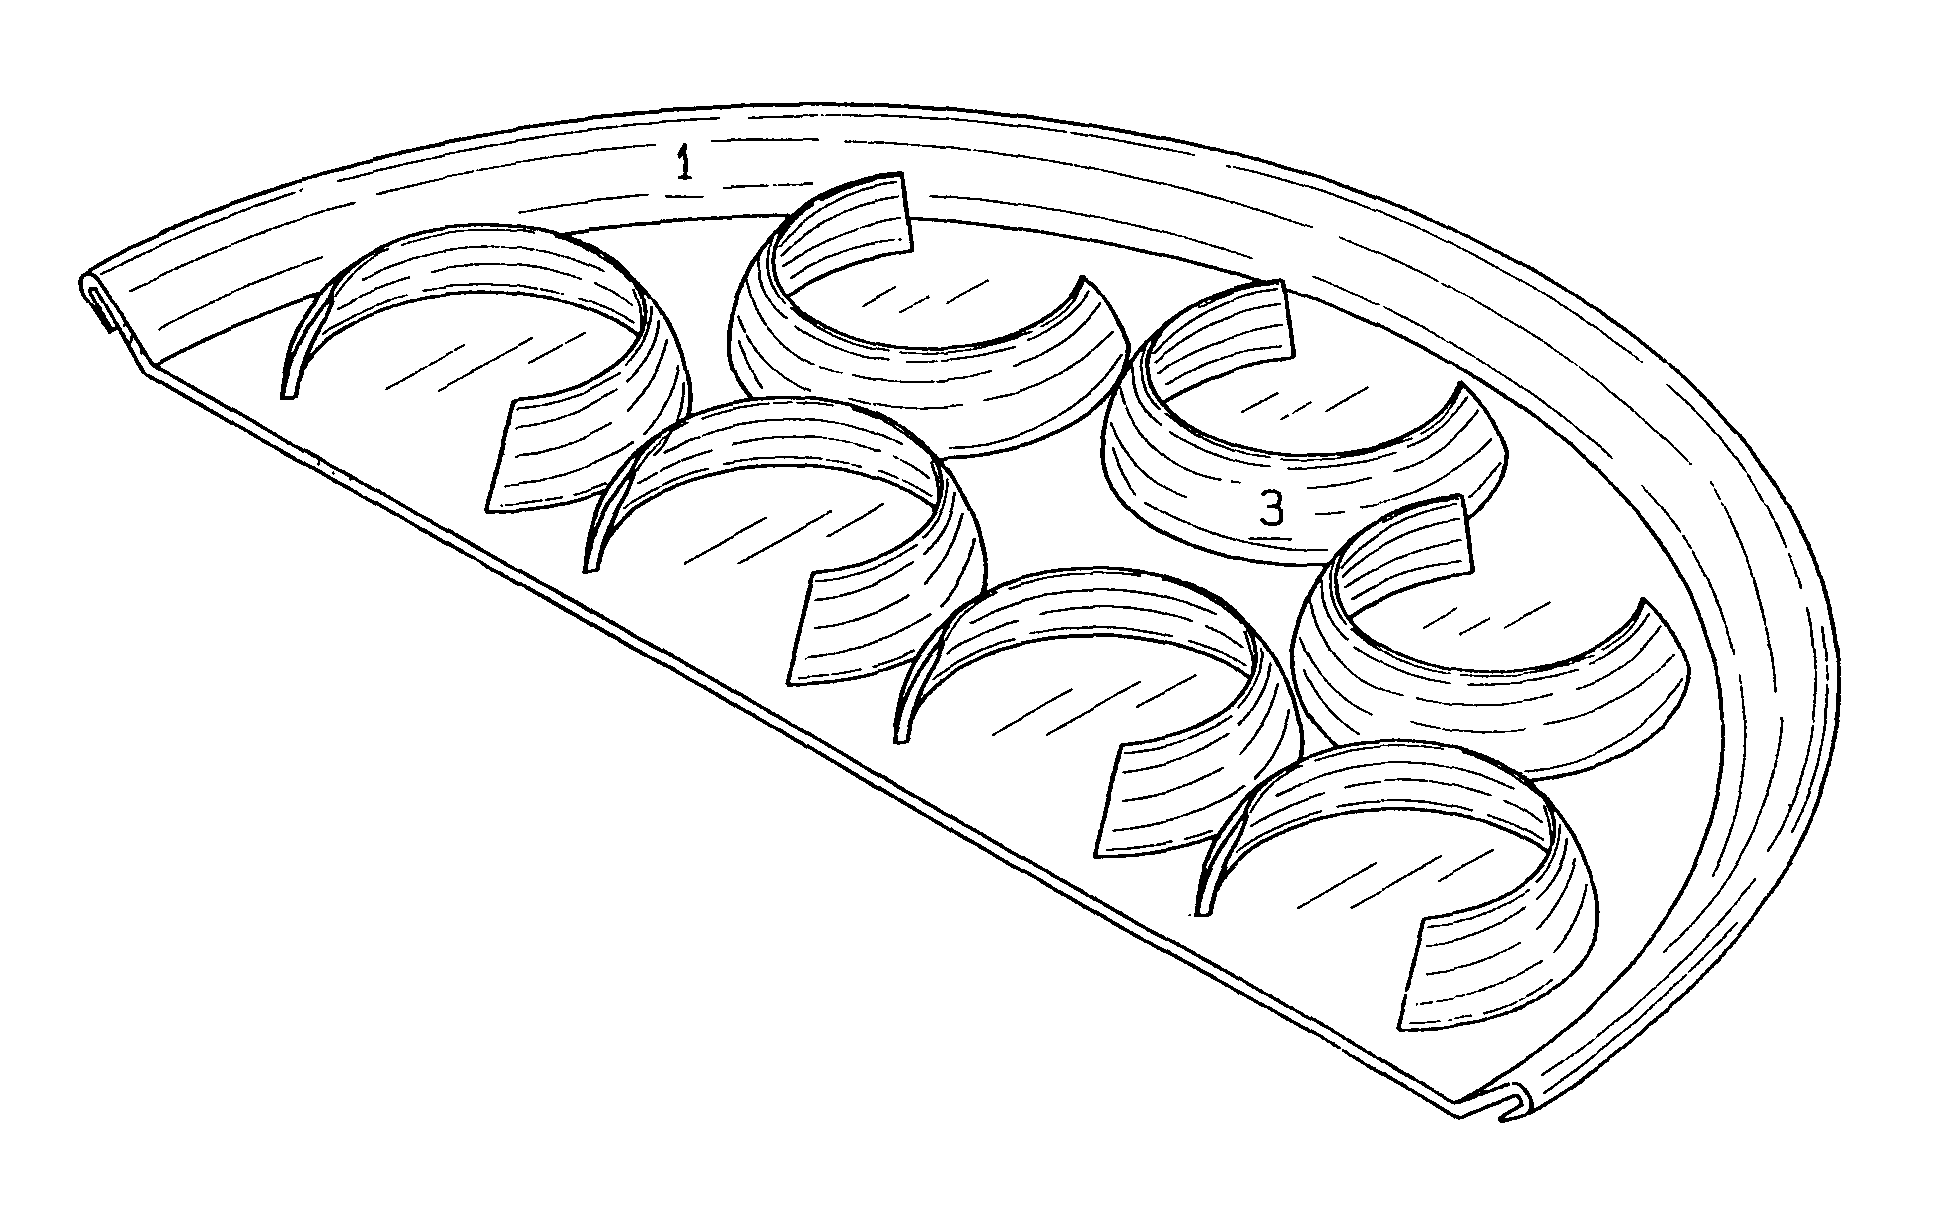 Supplemental container tray